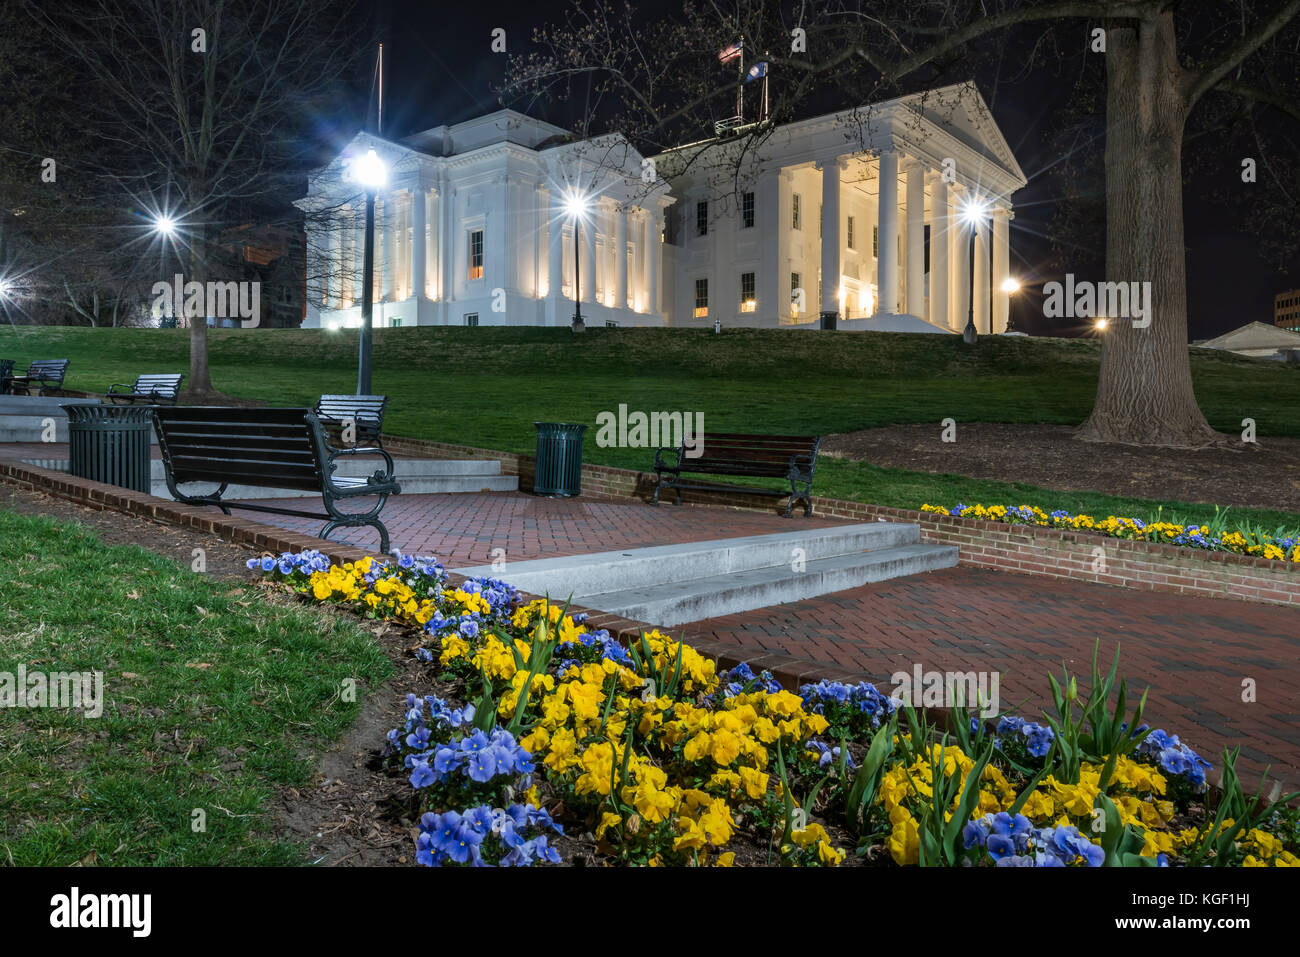 Virginia state capitol building in Richmond at night Stock Photo